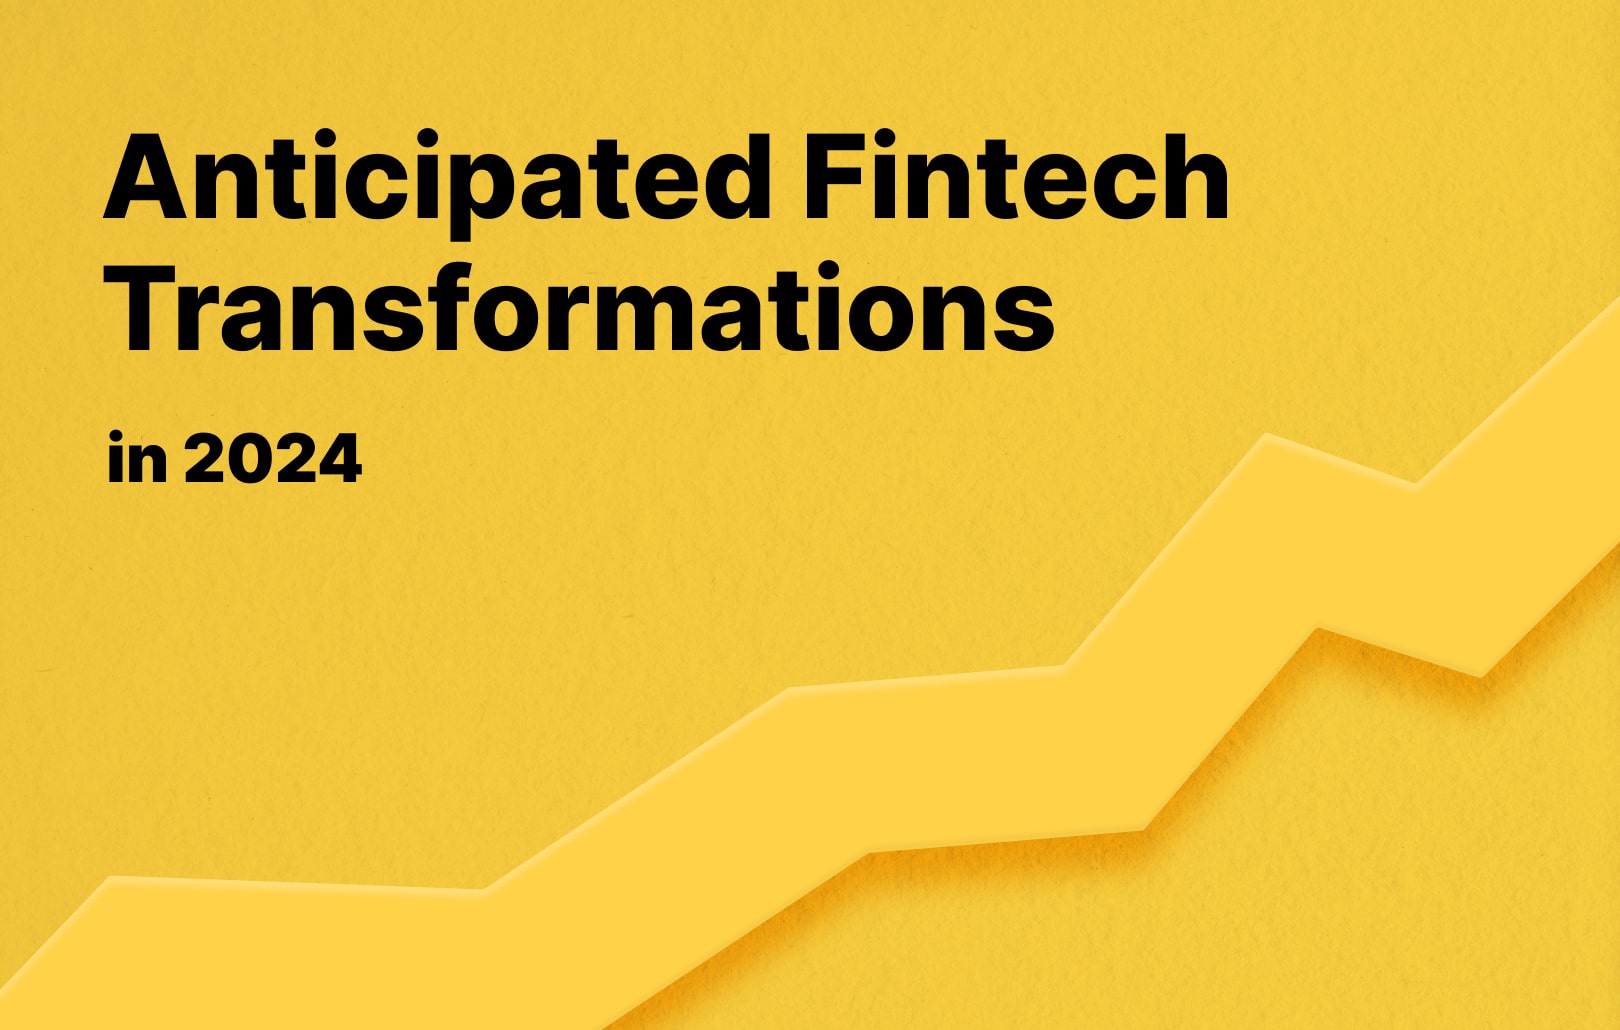 Anticipated Fintech Transformations in 2024